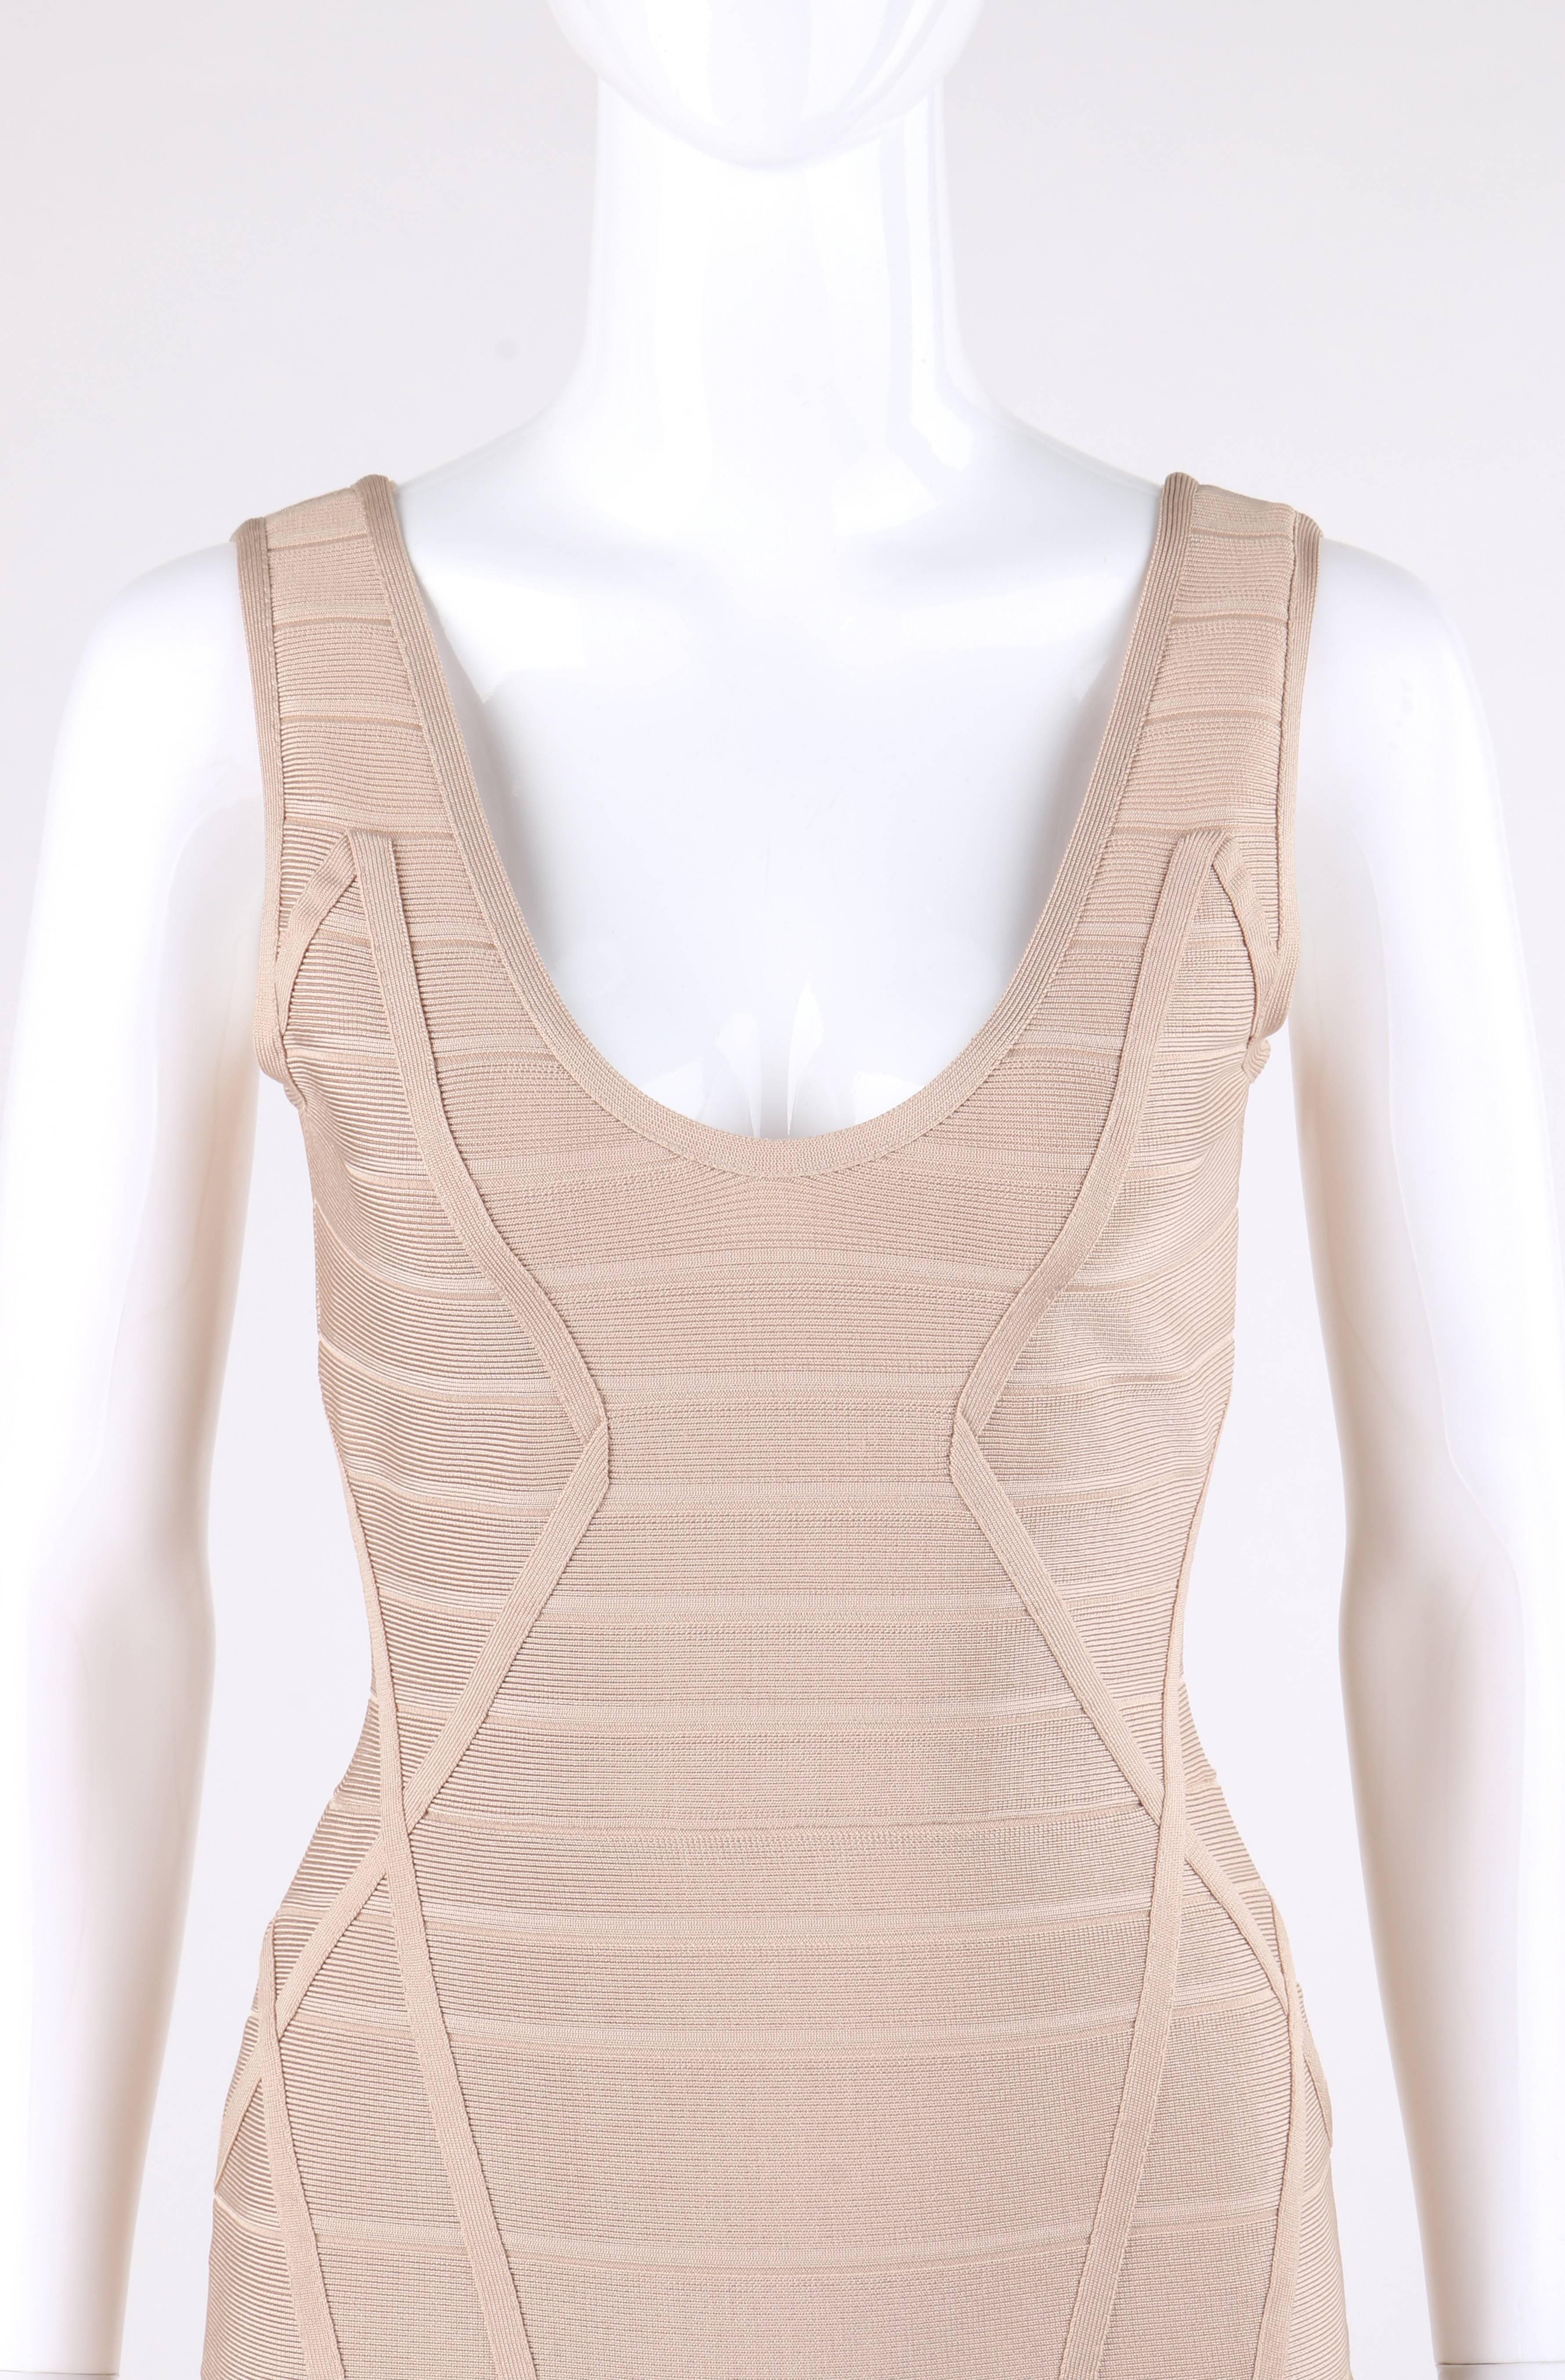 Herve Leger beige v-neck sleeveless bandage knit bodycon dress; New with tags. Designed by Max Azria. Rounded front and back deep v-neckline. Sleeveless. Thin bandage strips detail that curves over waist, hips, and bustline at front and back. Center